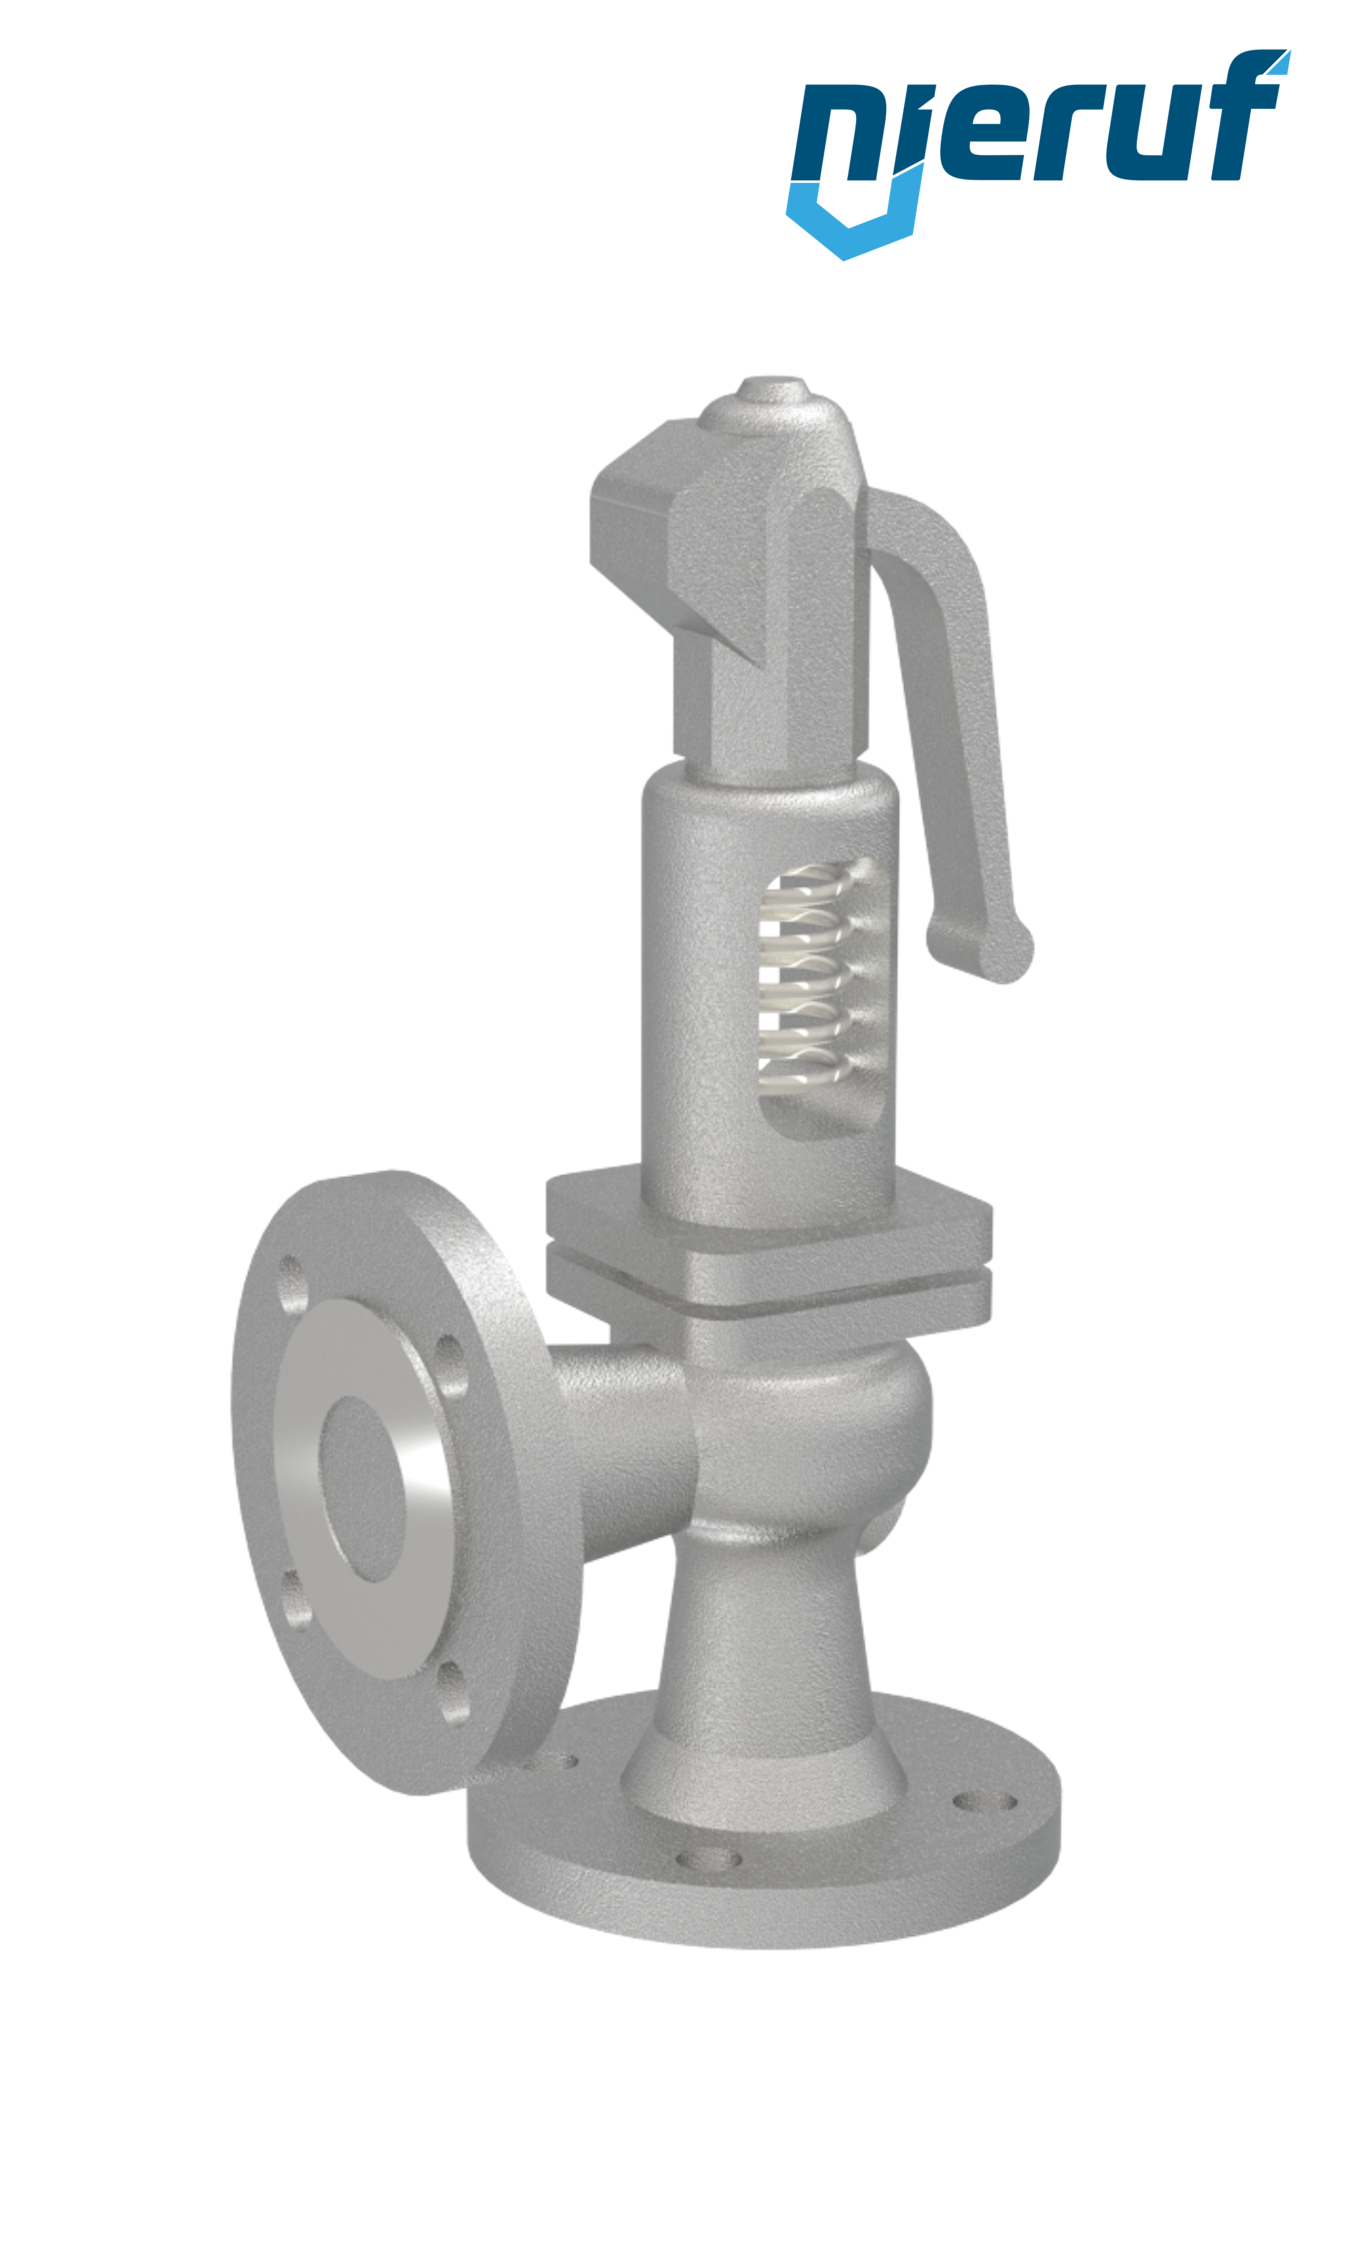 flange-safety valve DN100/DN100 SF0102, cast iron EN-JL1040 metal, with lever